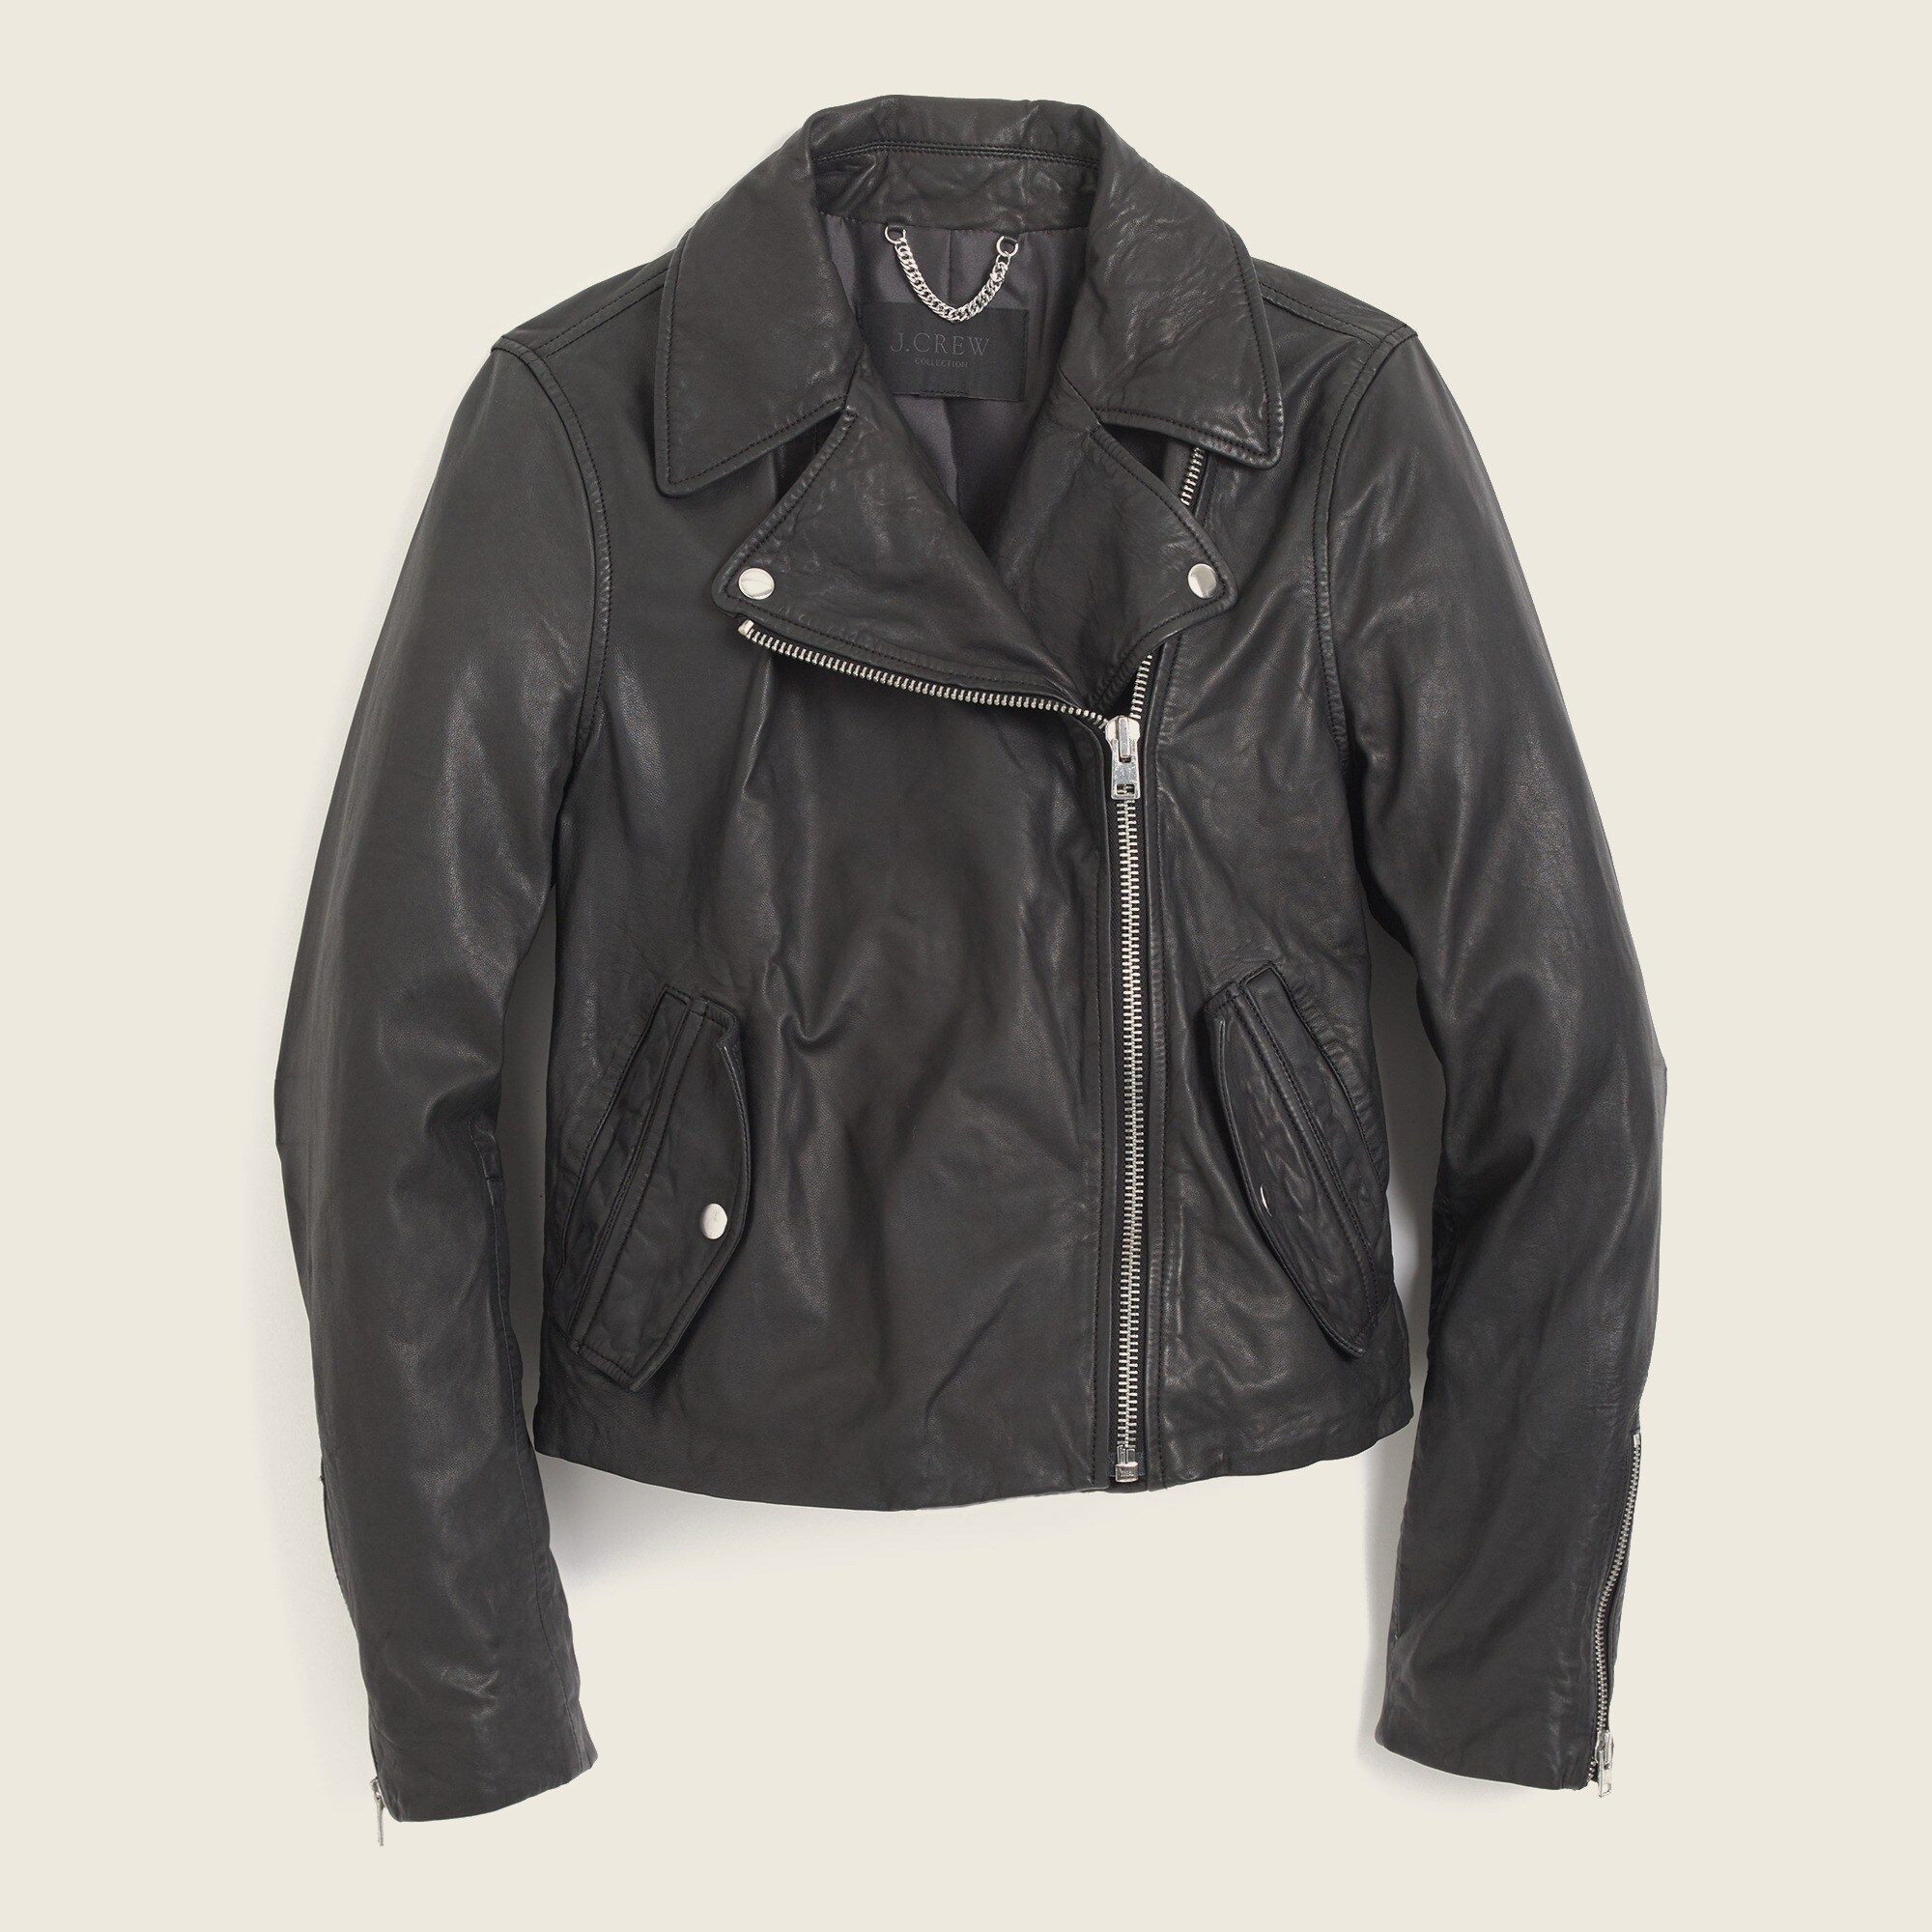 J.Crew: Collection Washed Leather Motorcycle Jacket For Women